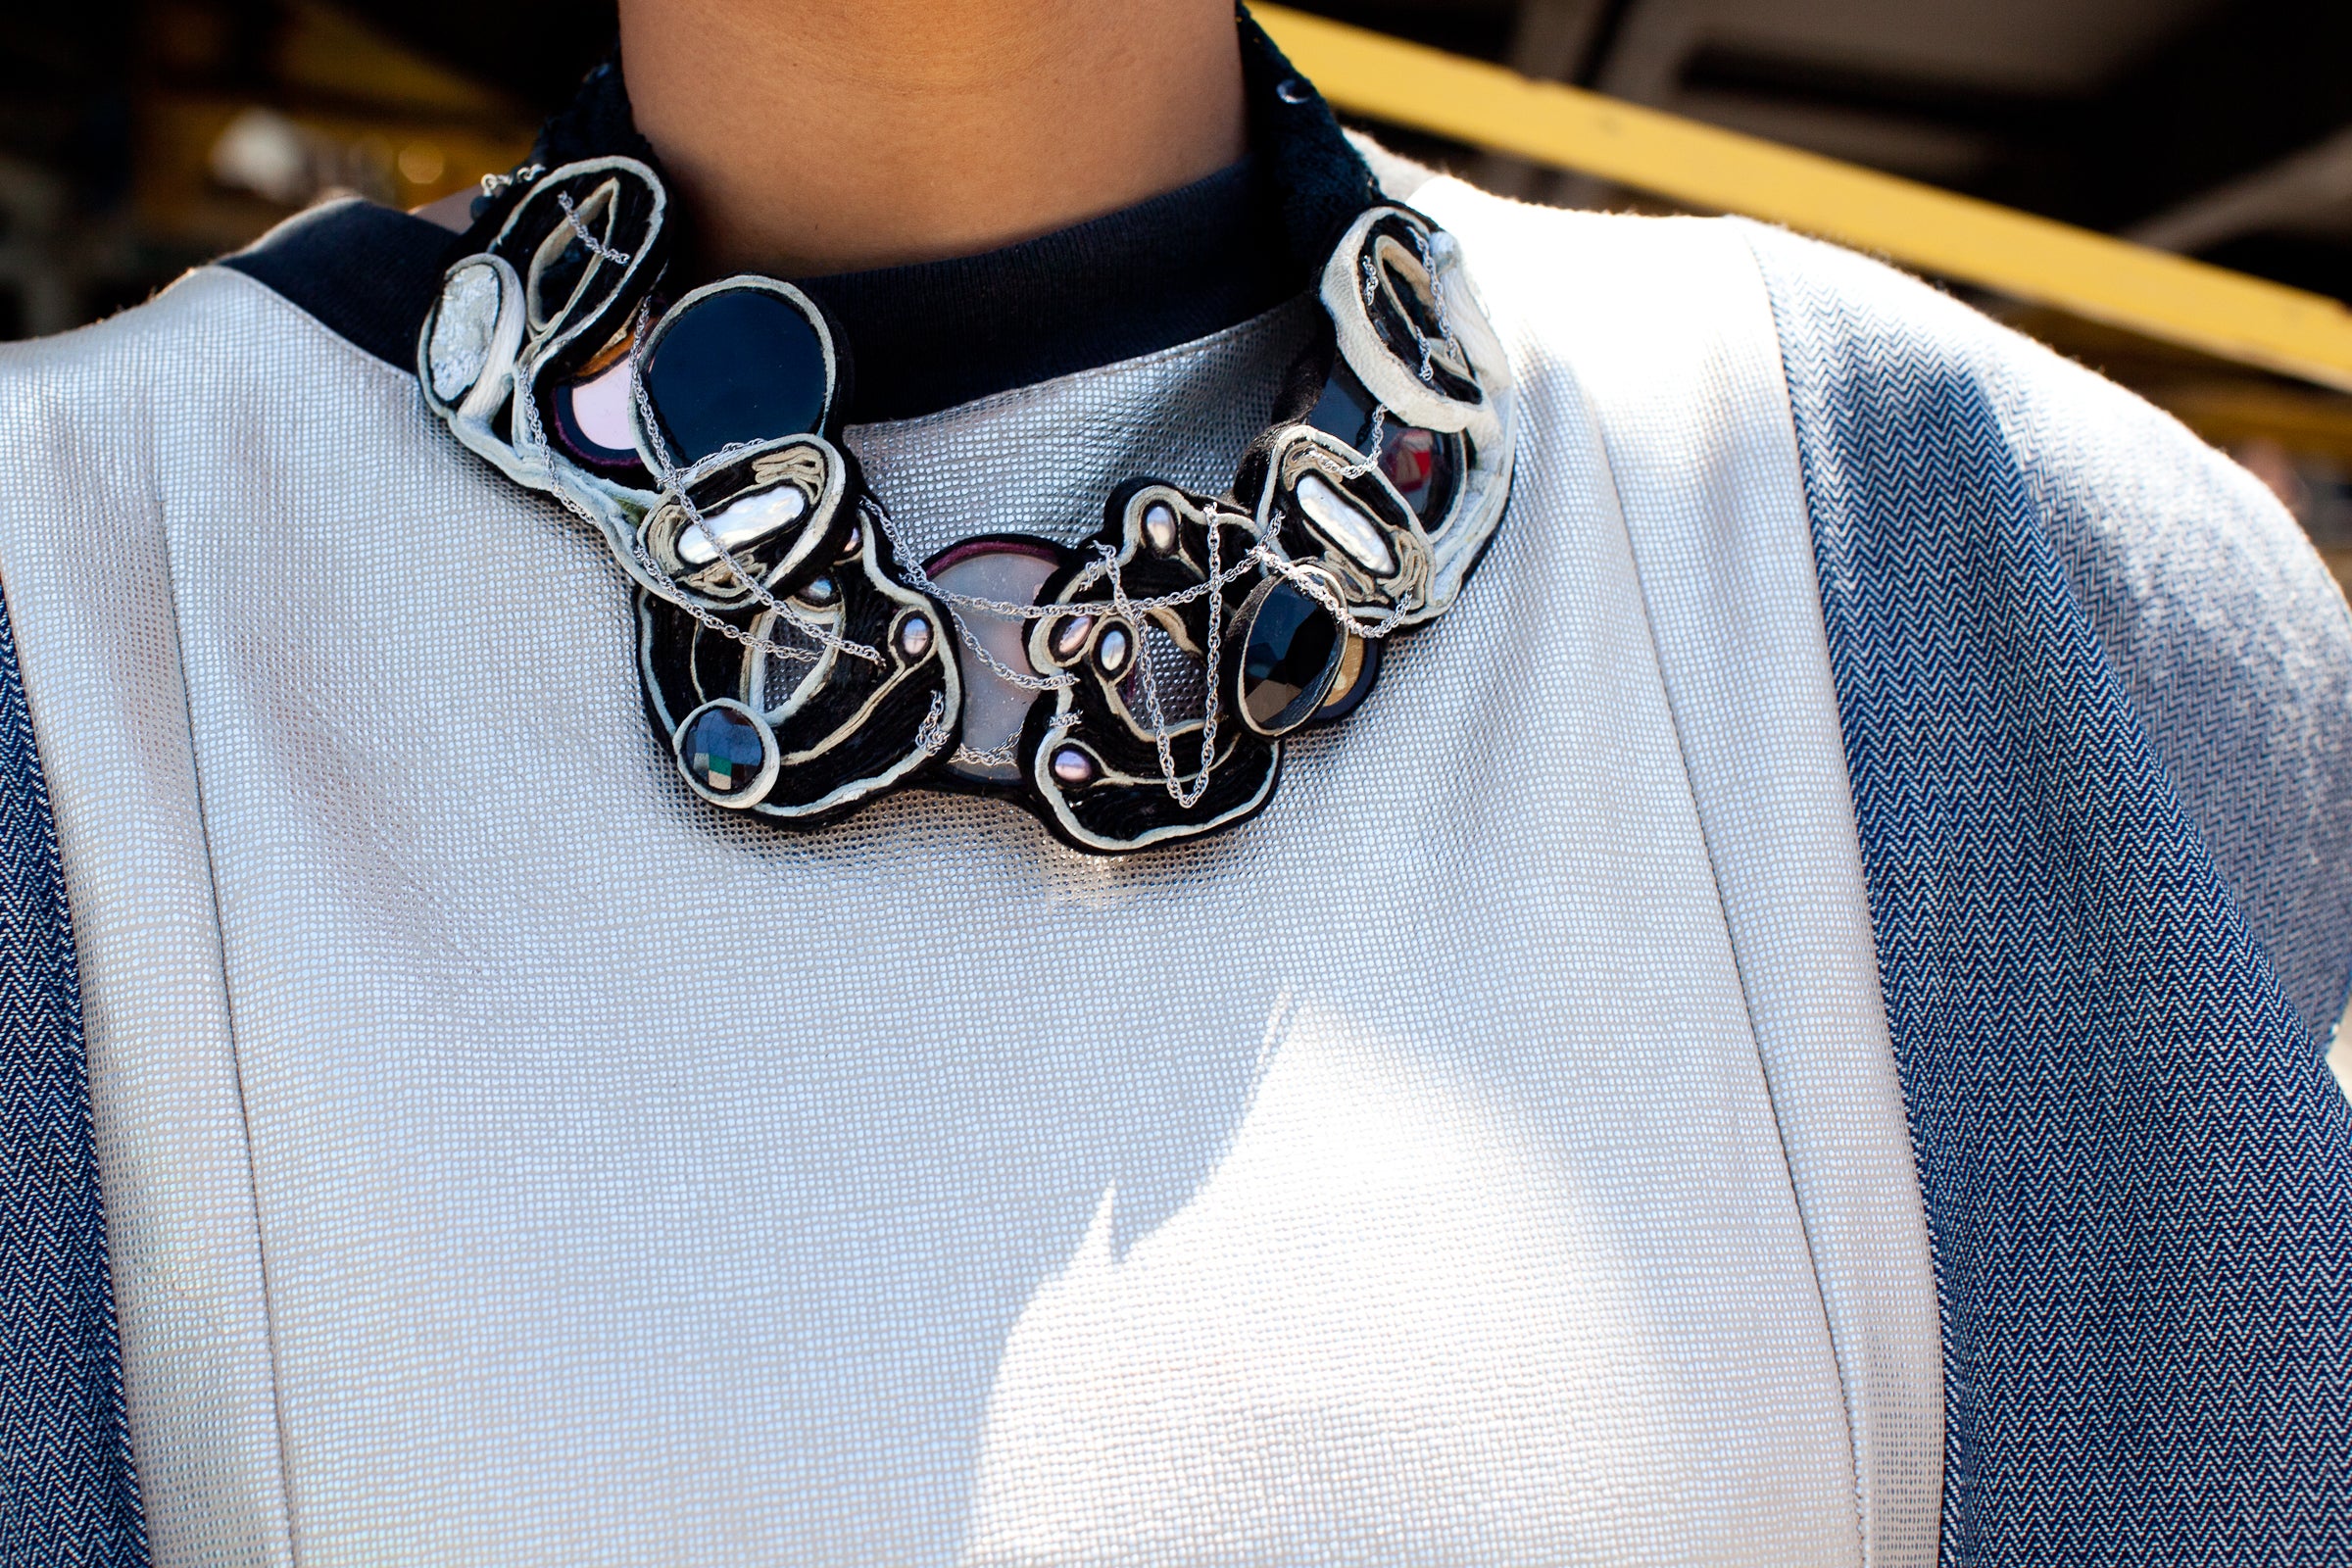 Street Style Accessories: Making Statements